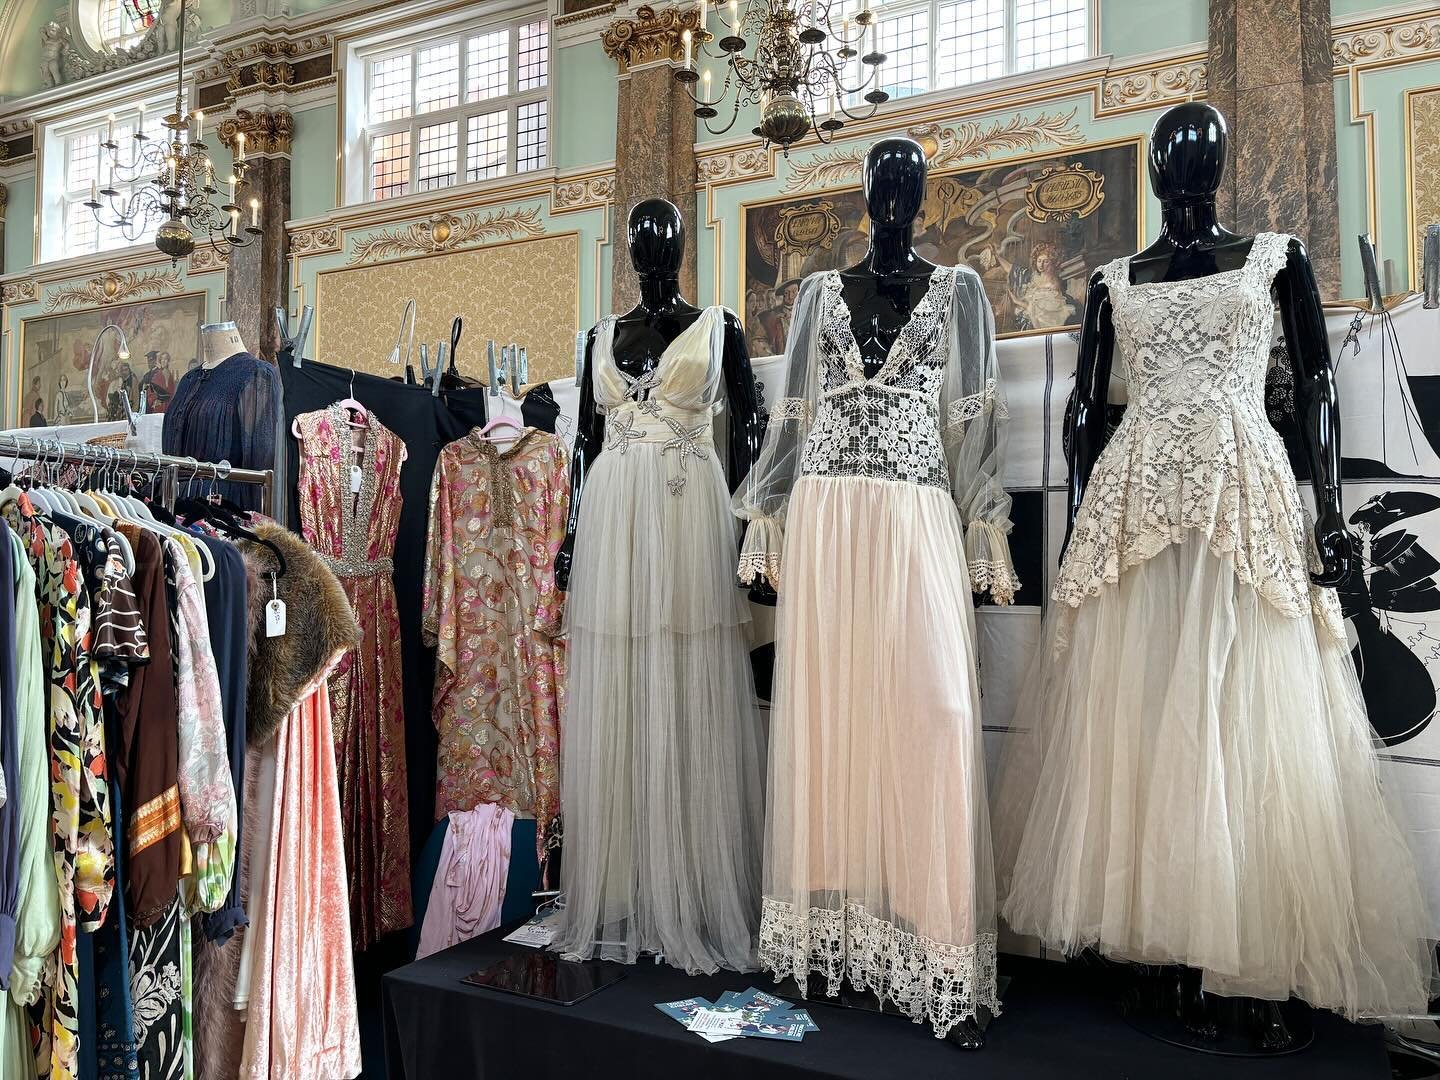 2  W E E K S ⏳ Frock Me! at Chelsea Sunday 12th May ~ the last of our events at this stunning hall until September (we&rsquo;ll be back at Kensington 23rd June)

Book ahead (especially for guaranteed 11am entry)
https://FrockMeMay2024.eventbrite.co.u